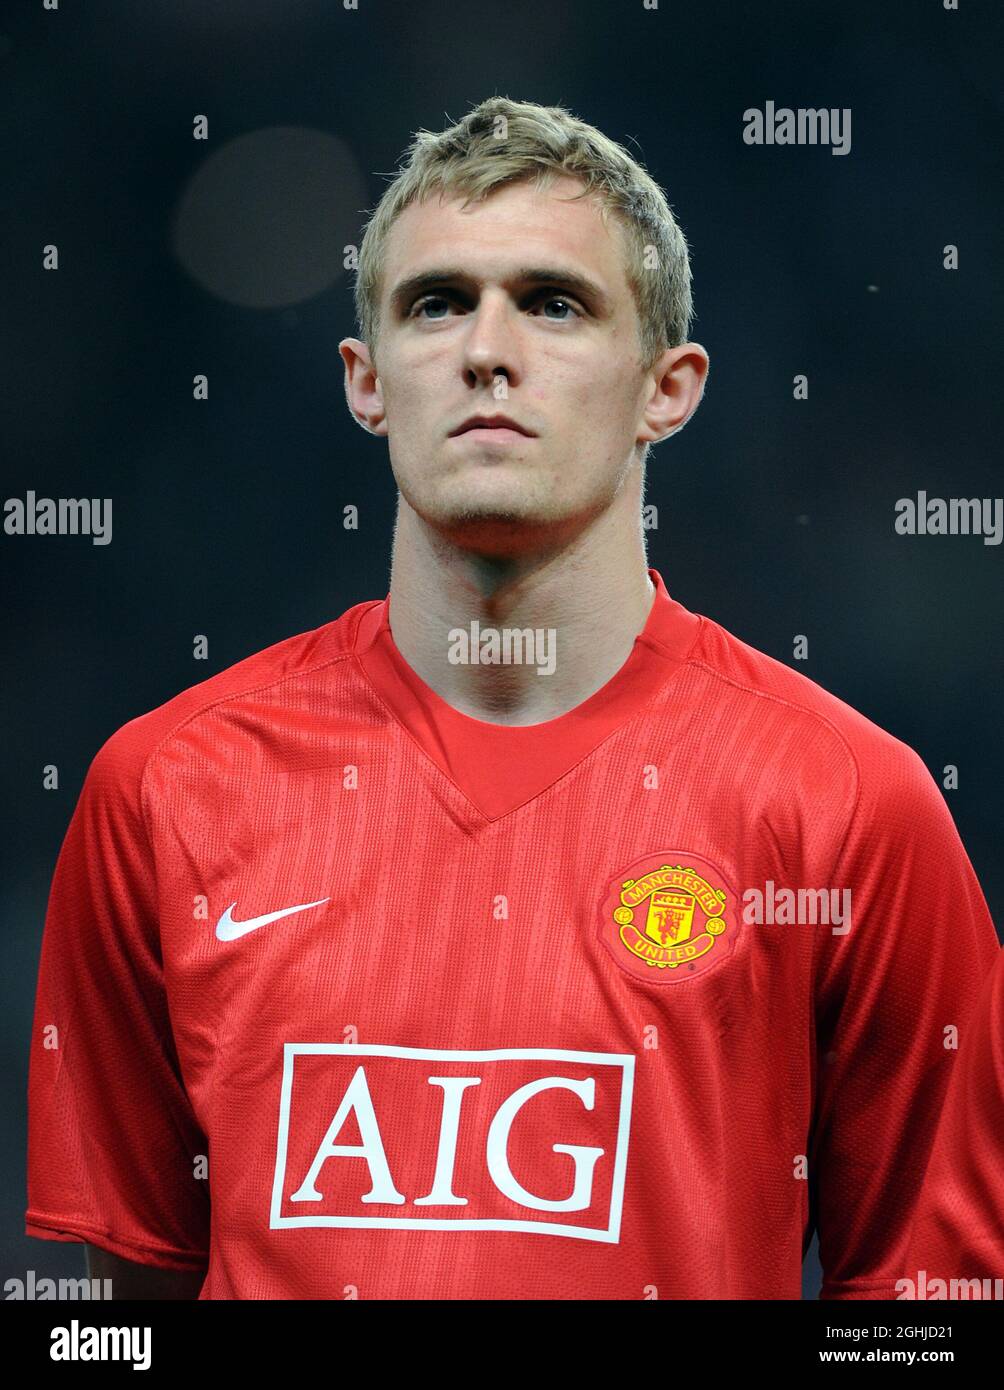 Darren Fletcher of Manchester United during the UEFA Champions League match  at London Stock Photo - Alamy